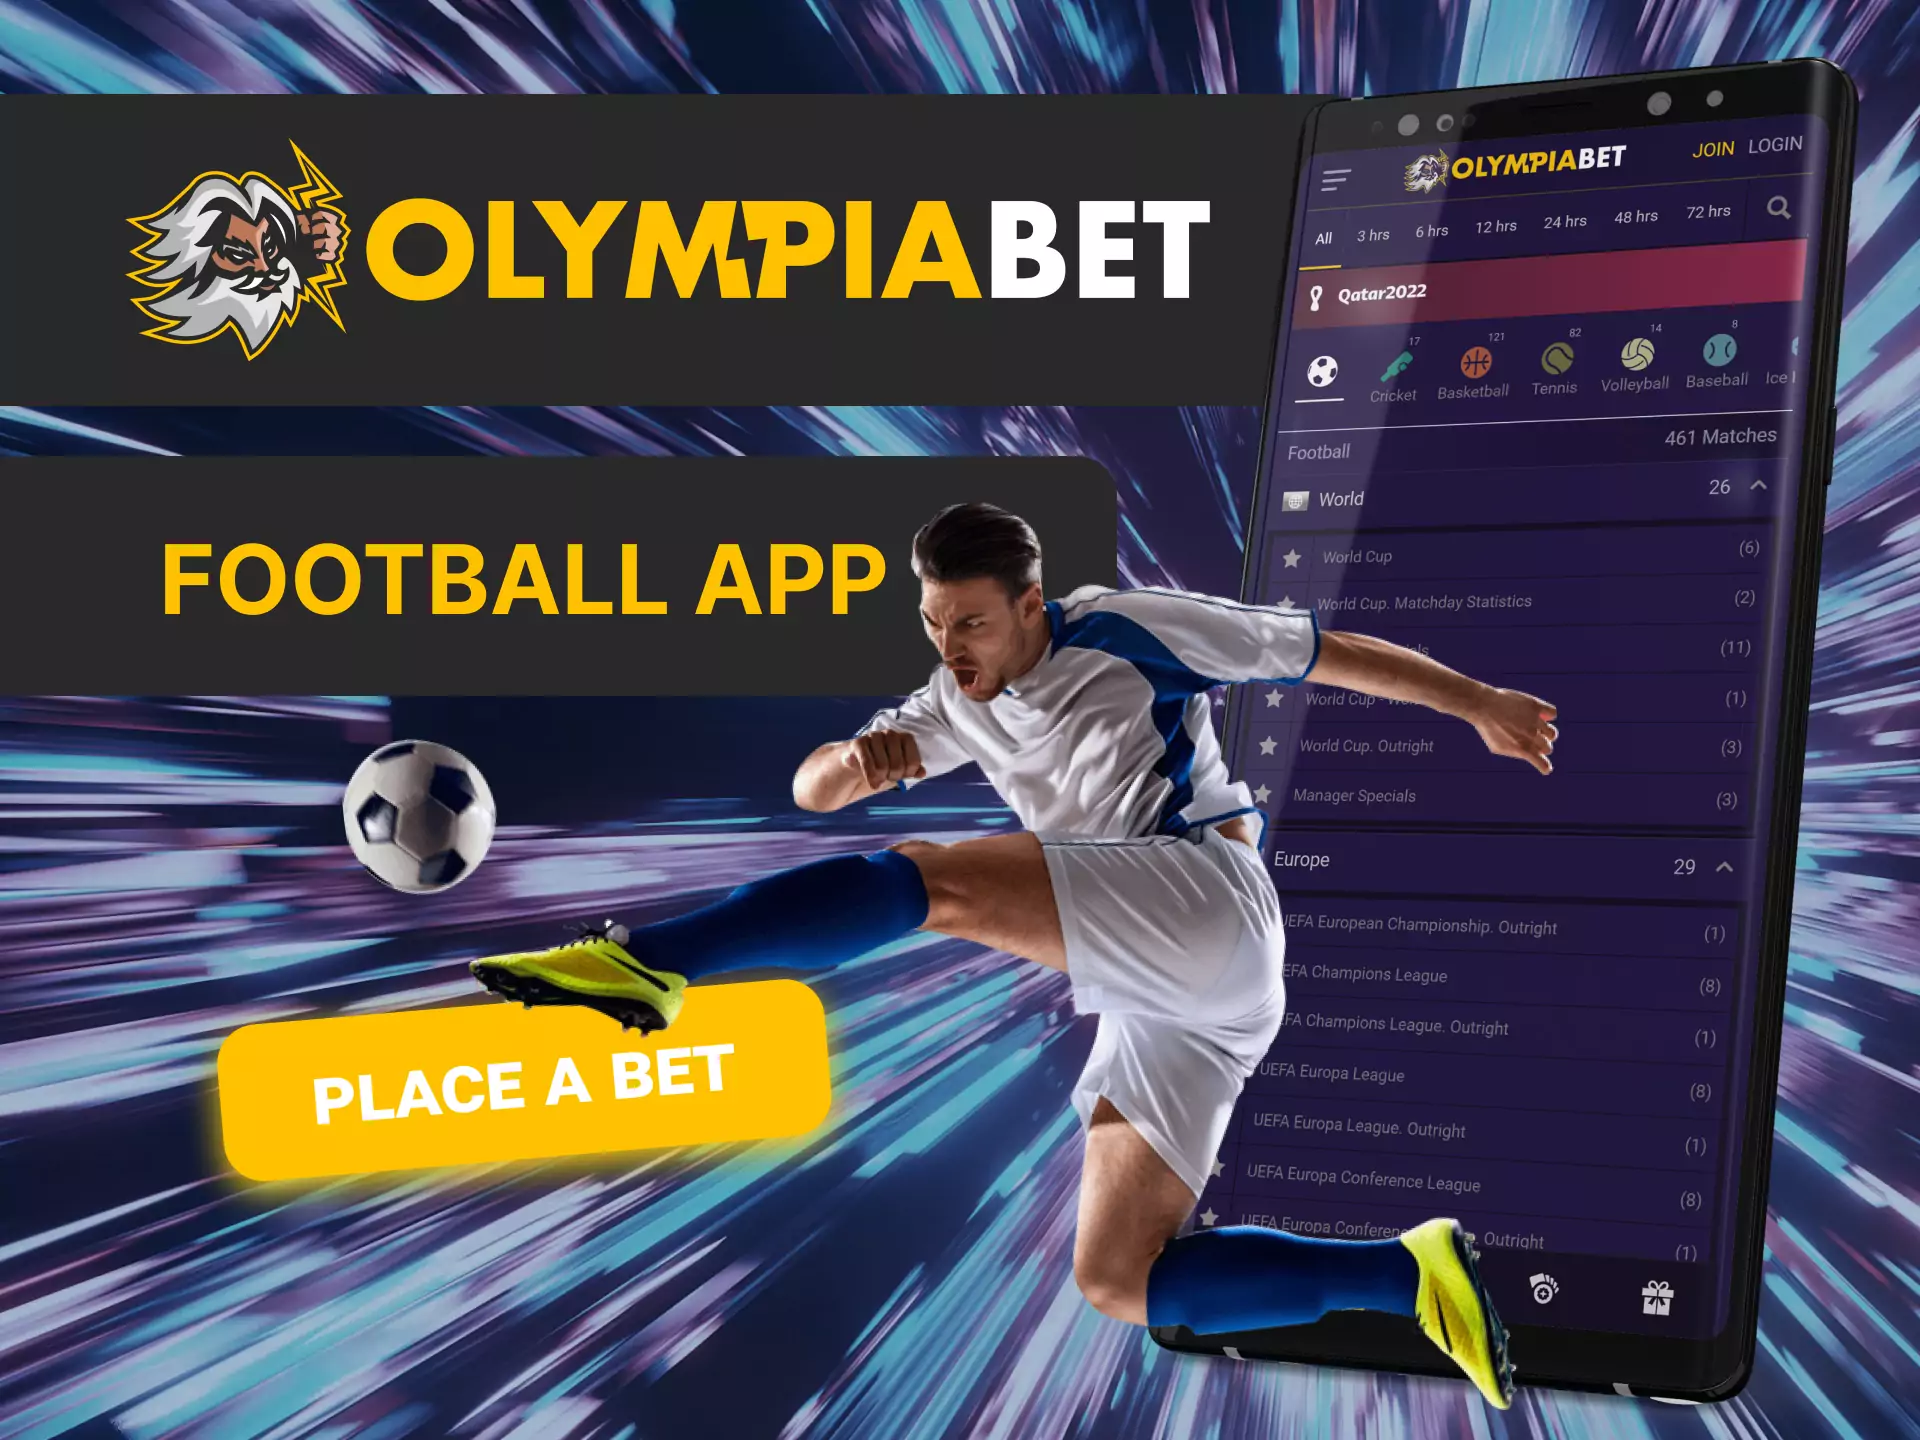 In OlympiaBet, you can bet on football.